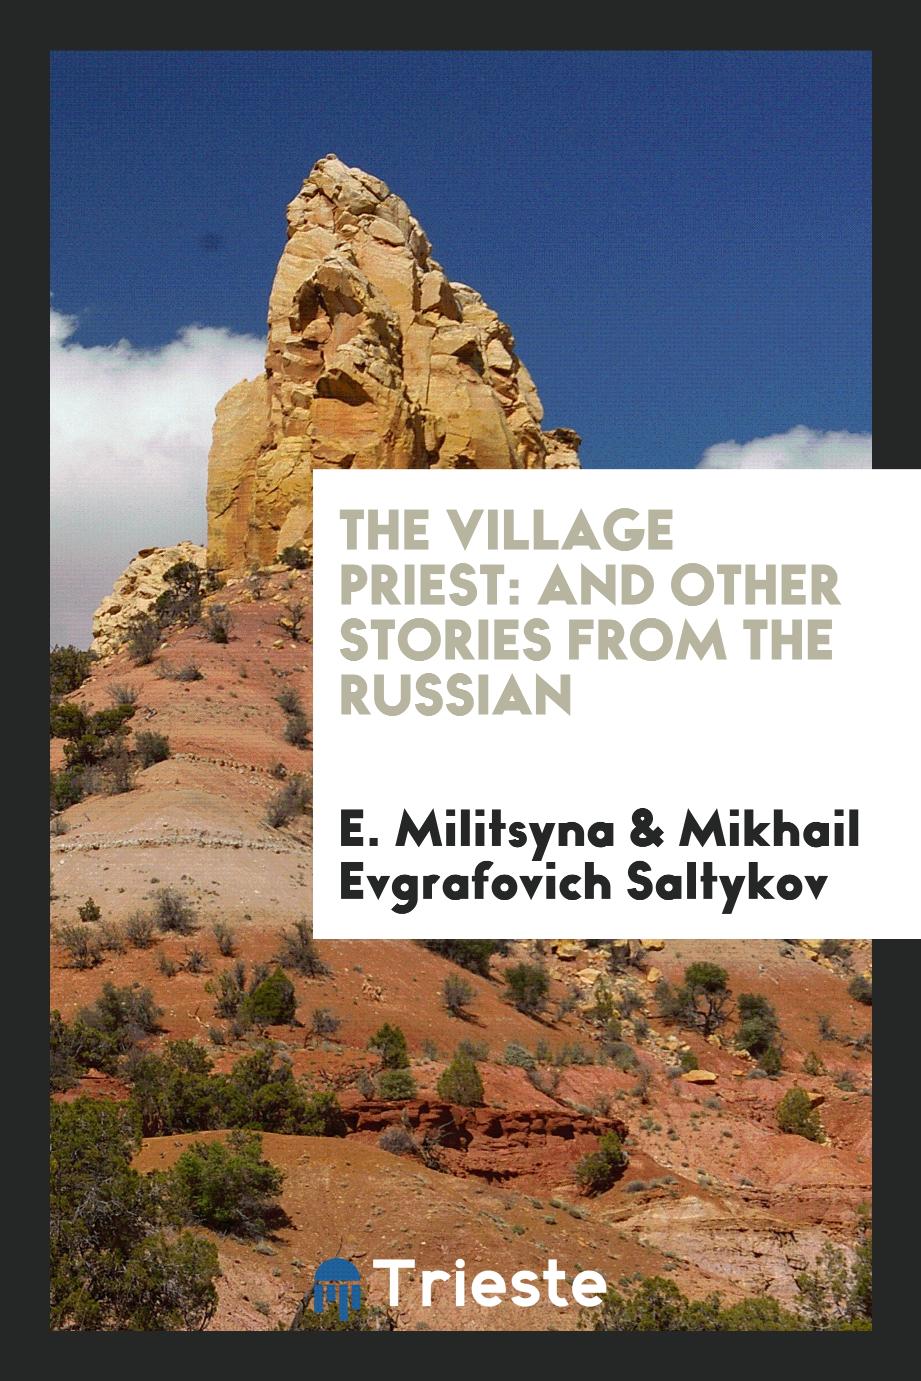 The village priest: and other stories from the Russian